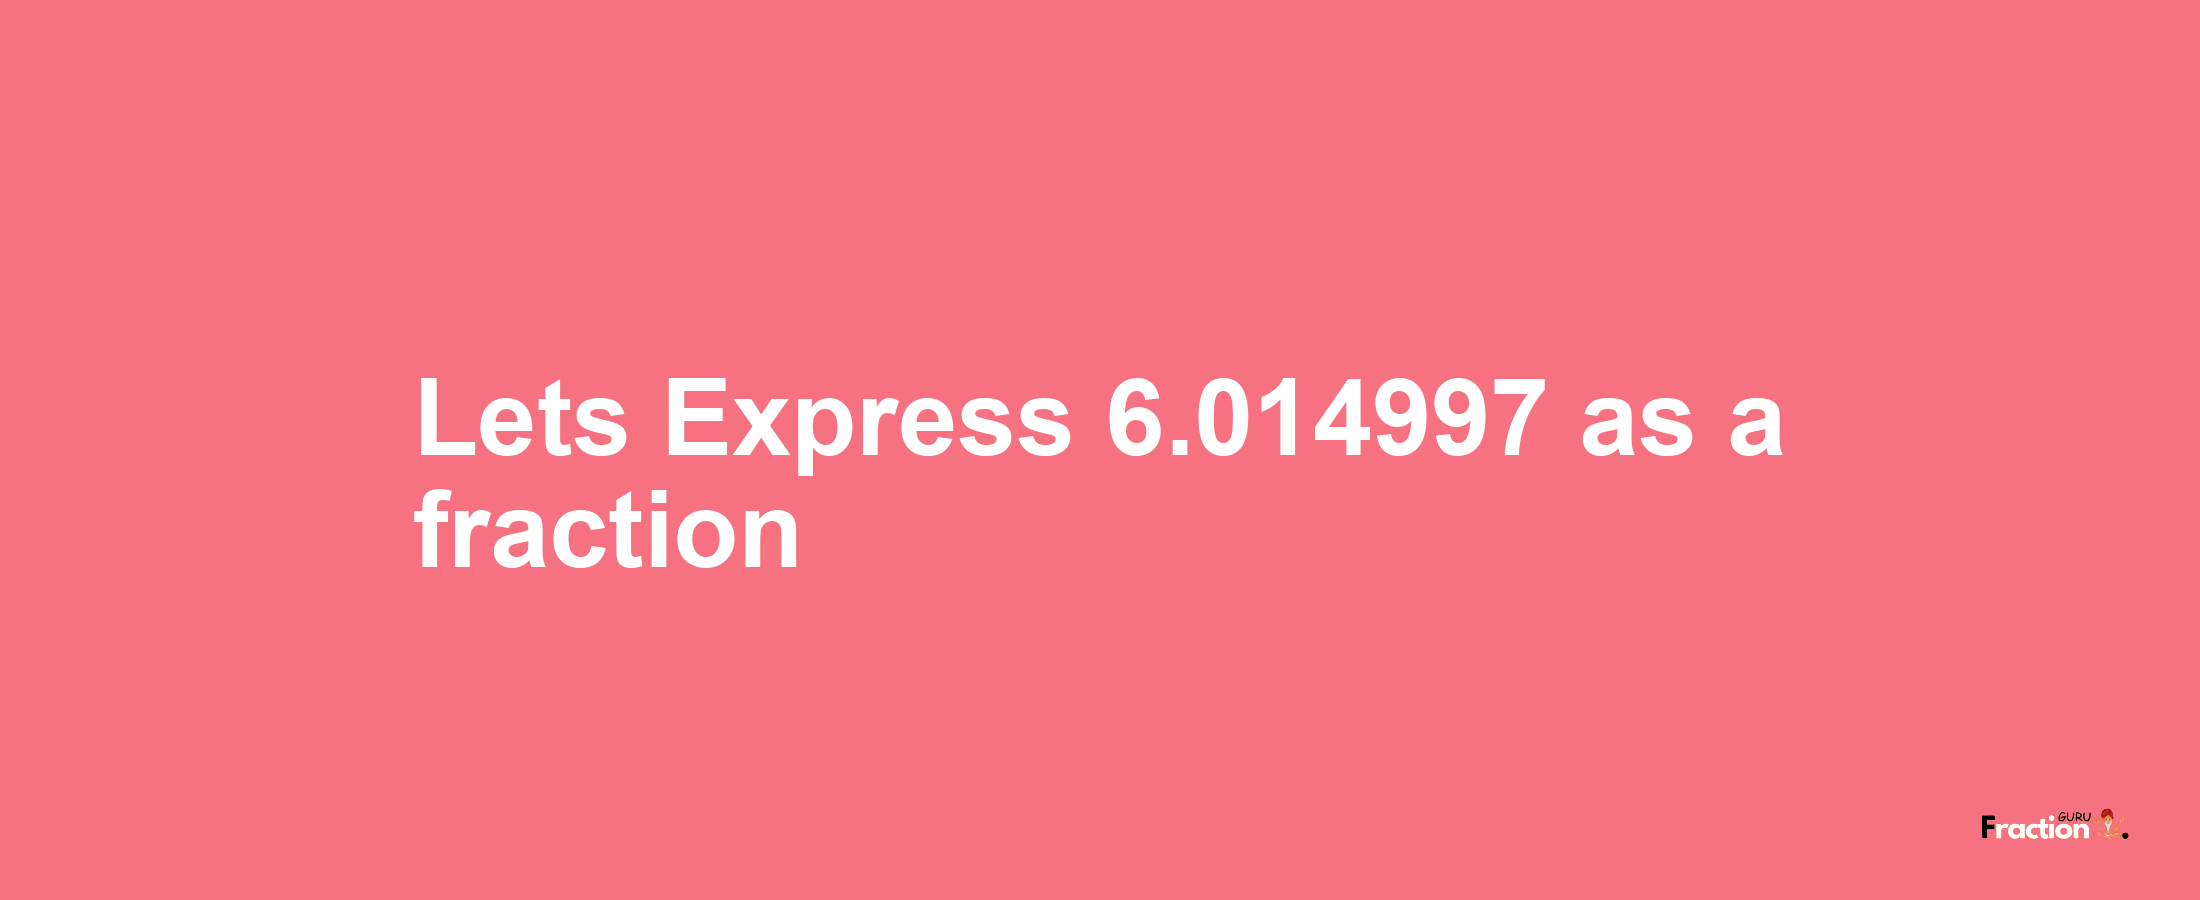 Lets Express 6.014997 as afraction